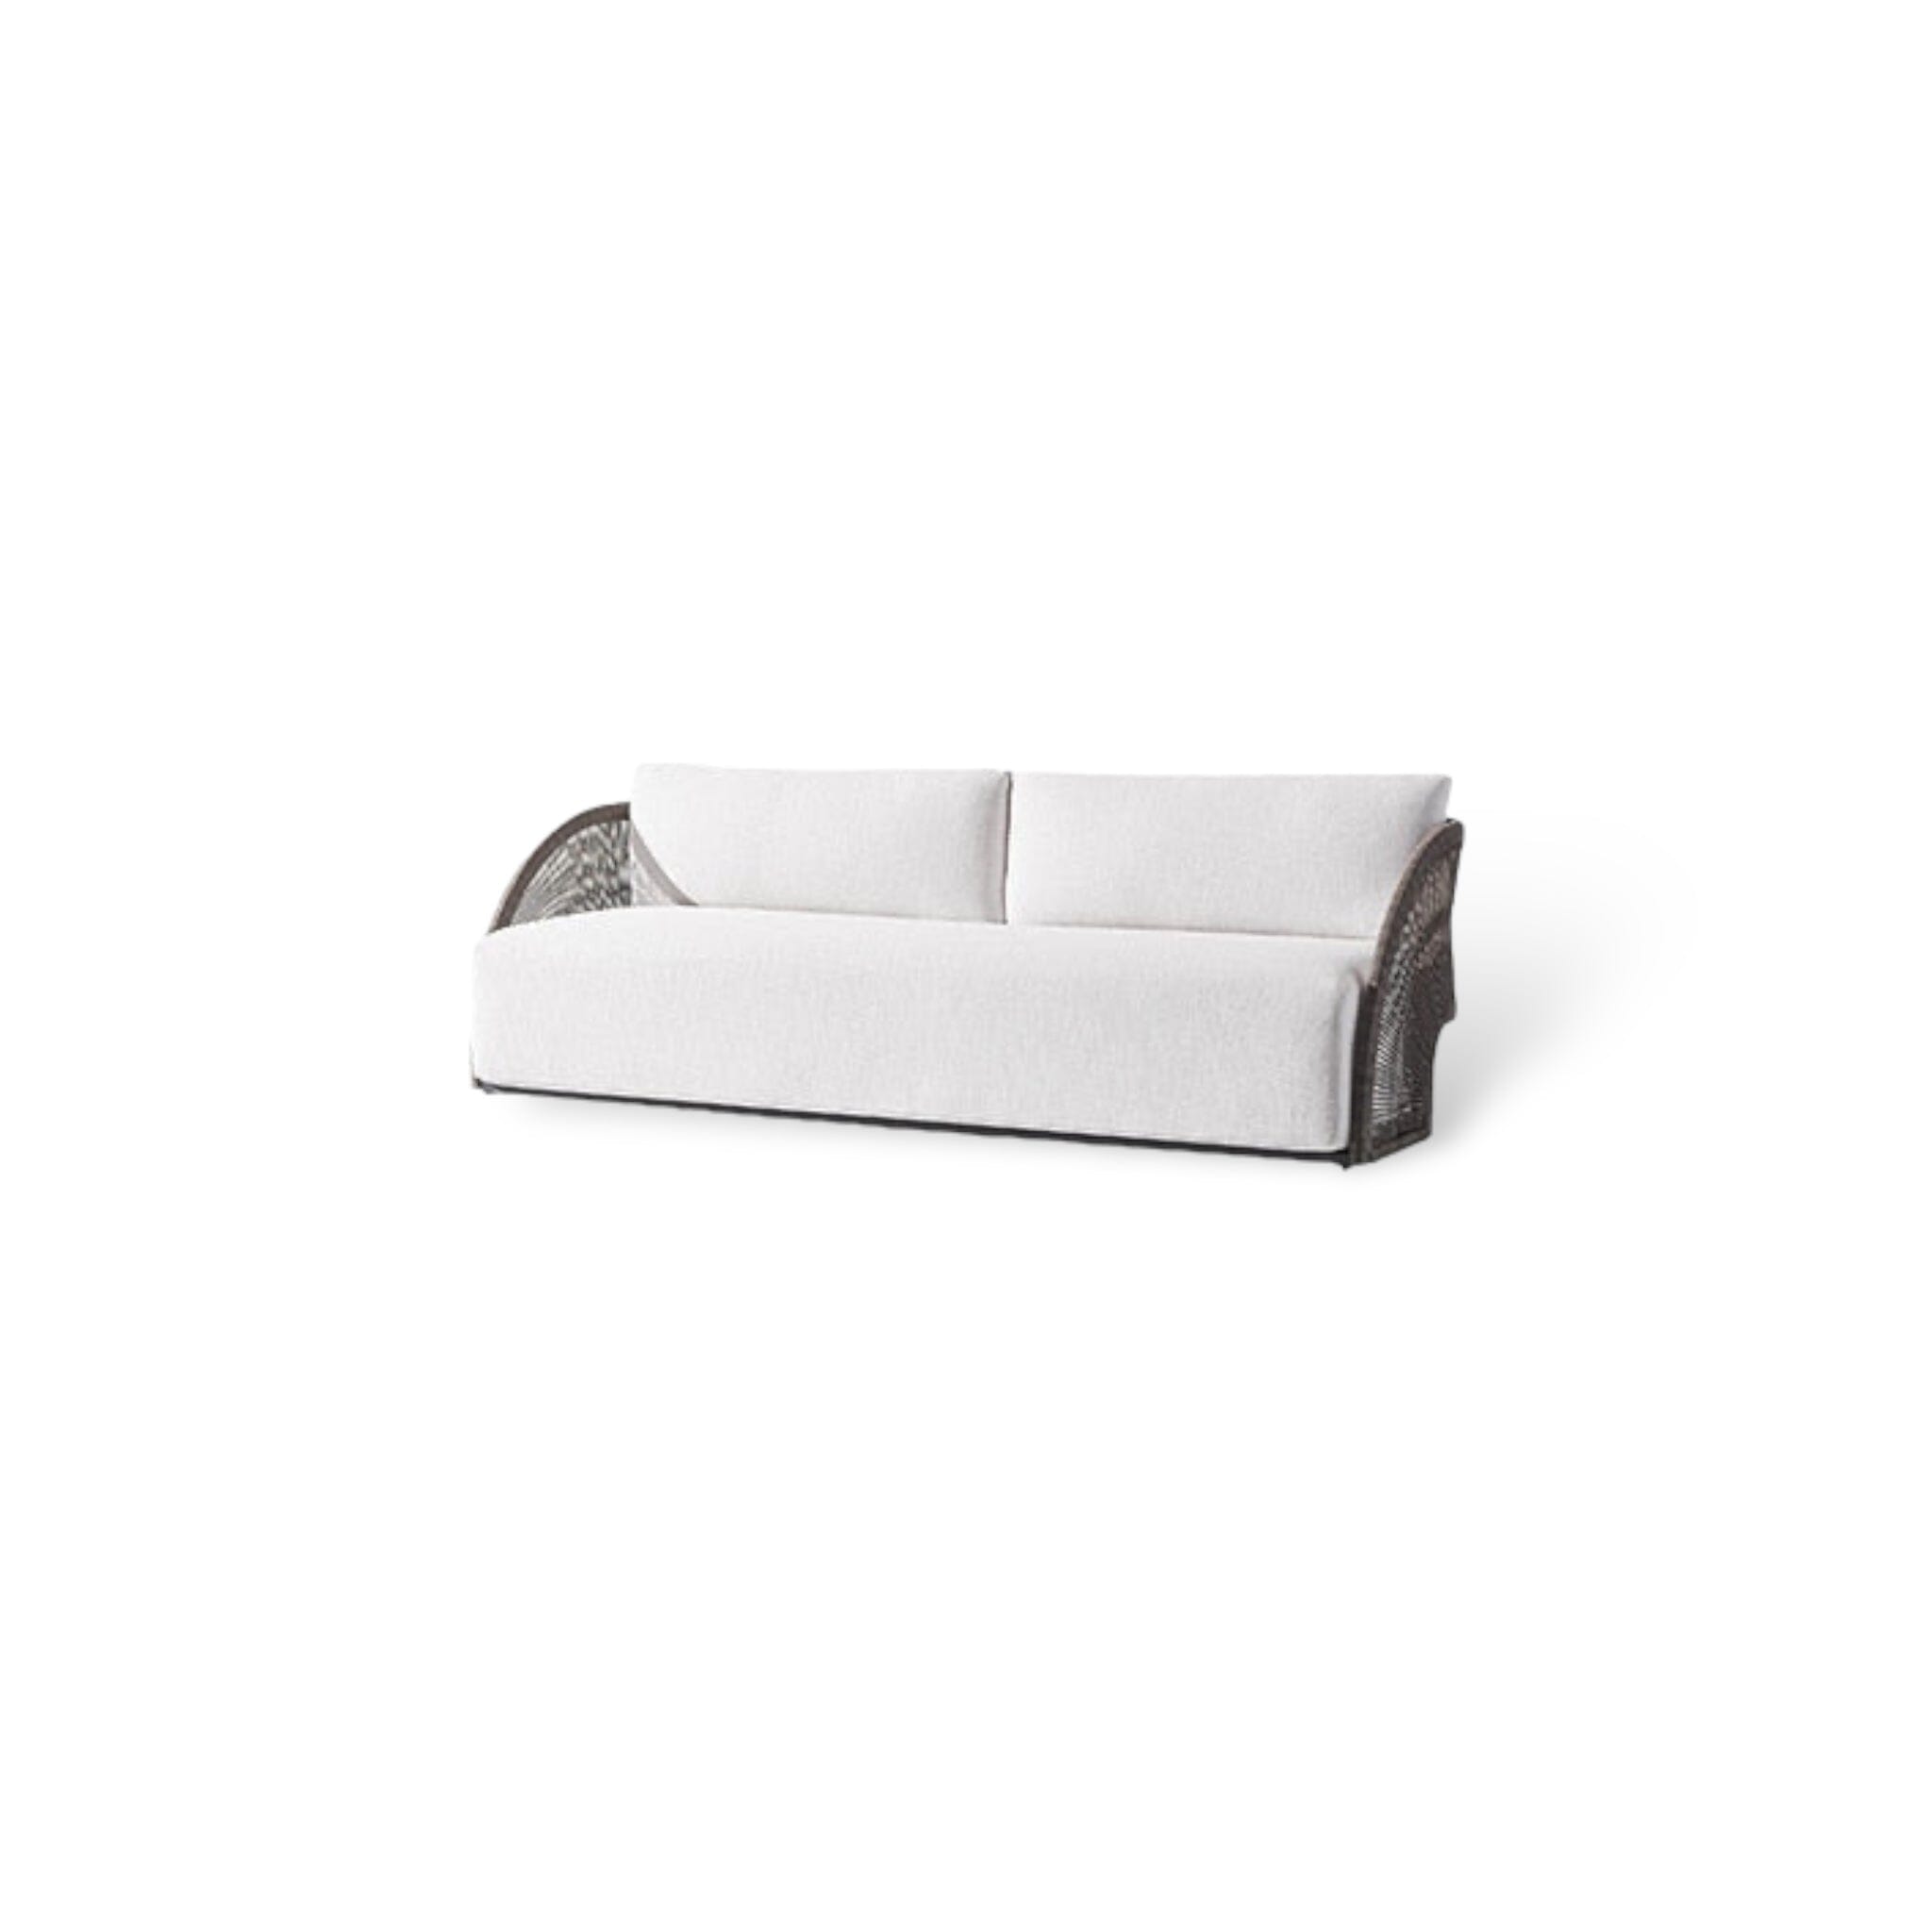 Antole Outdoor Collection Outdoor Furniture Chocolate - Two Seater 